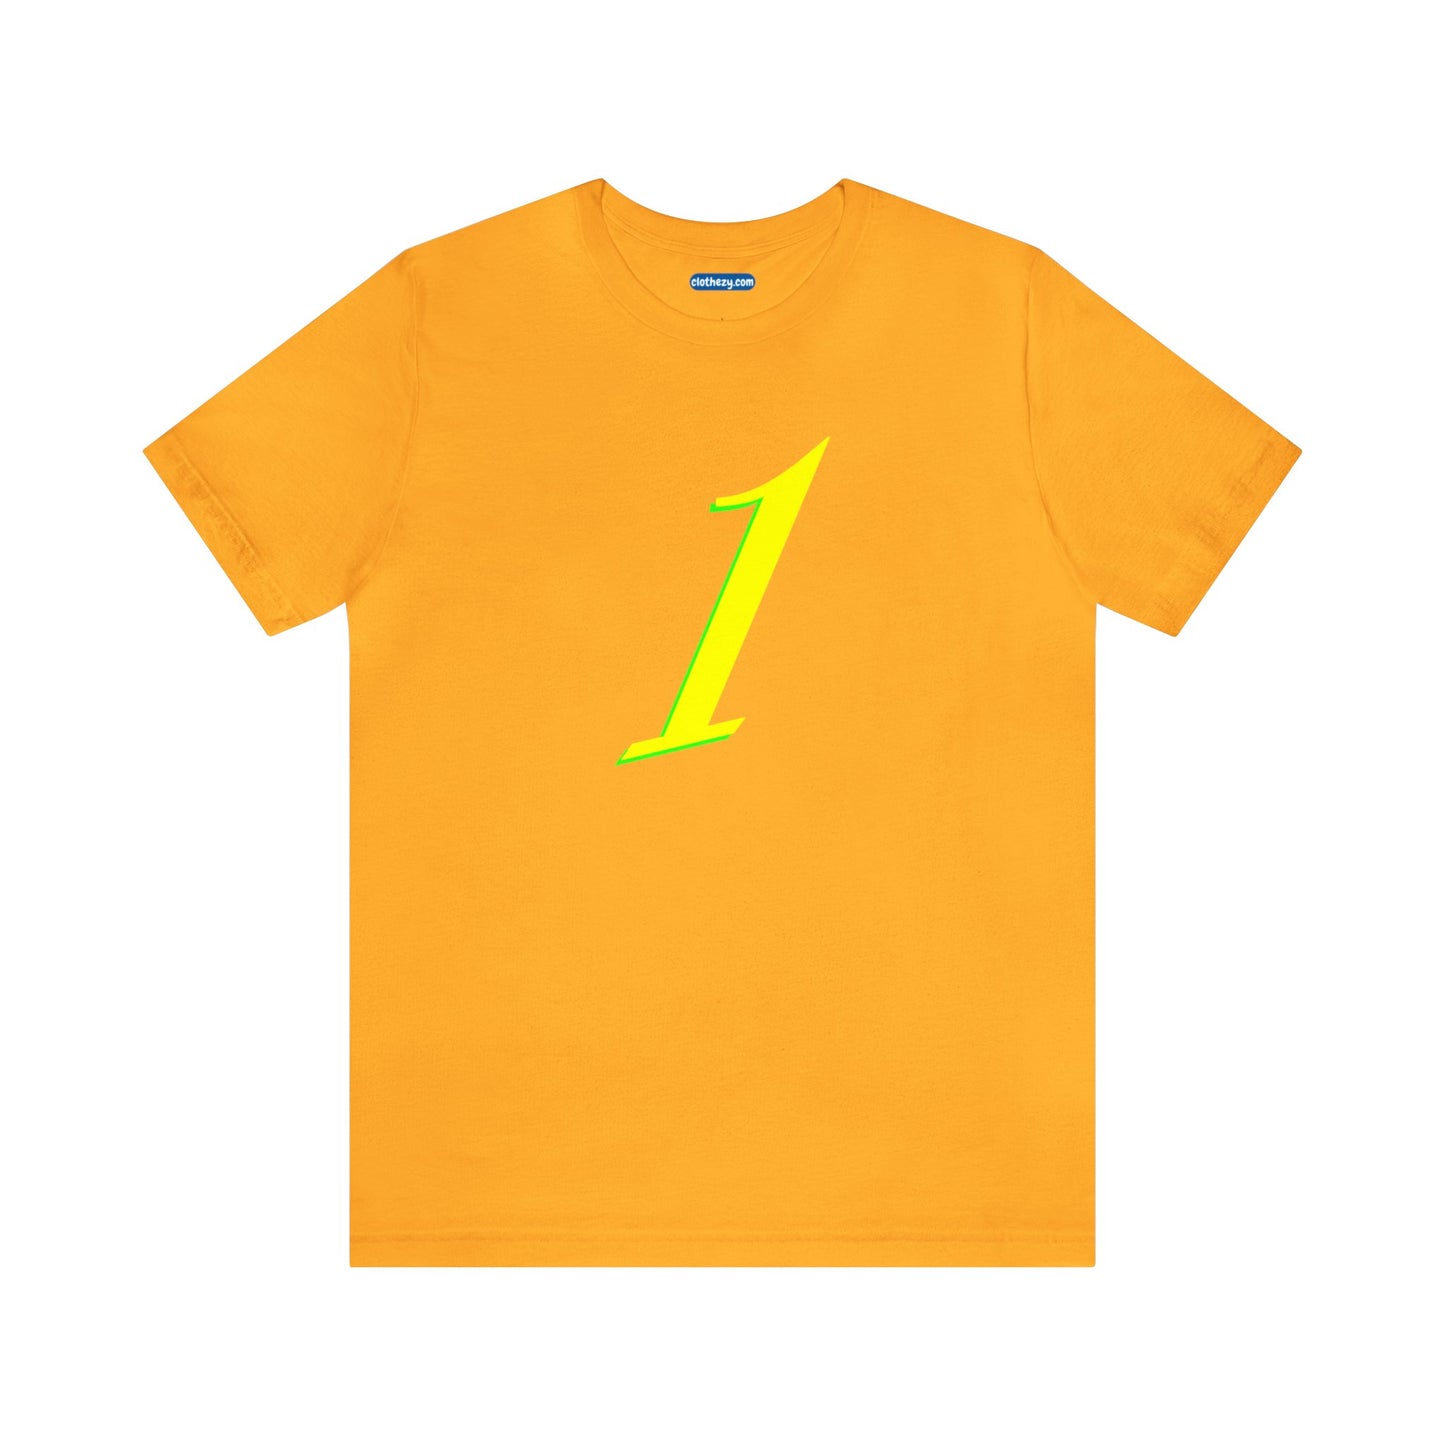 Number 1 Design - Soft Cotton Tee for birthdays and celebrations, Gift for friends and family, Multiple Options by clothezy.com in Green Heather Size Small - Buy Now